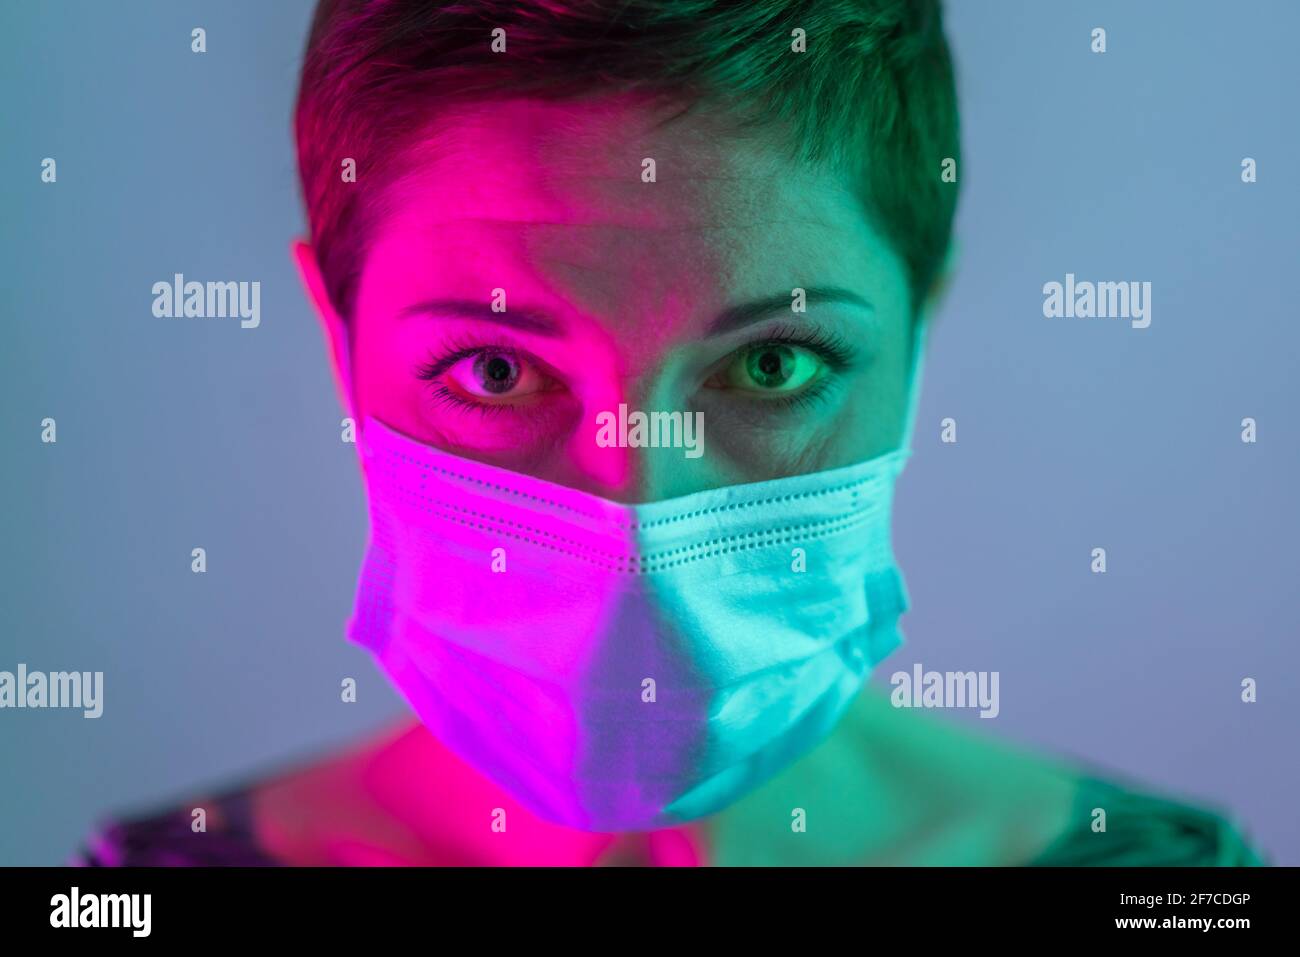 Beautiful woman with short hair wearing a face mask, looking worried and depressed in violet and green lighting. Life in quarantine. Dealing with coro Stock Photo